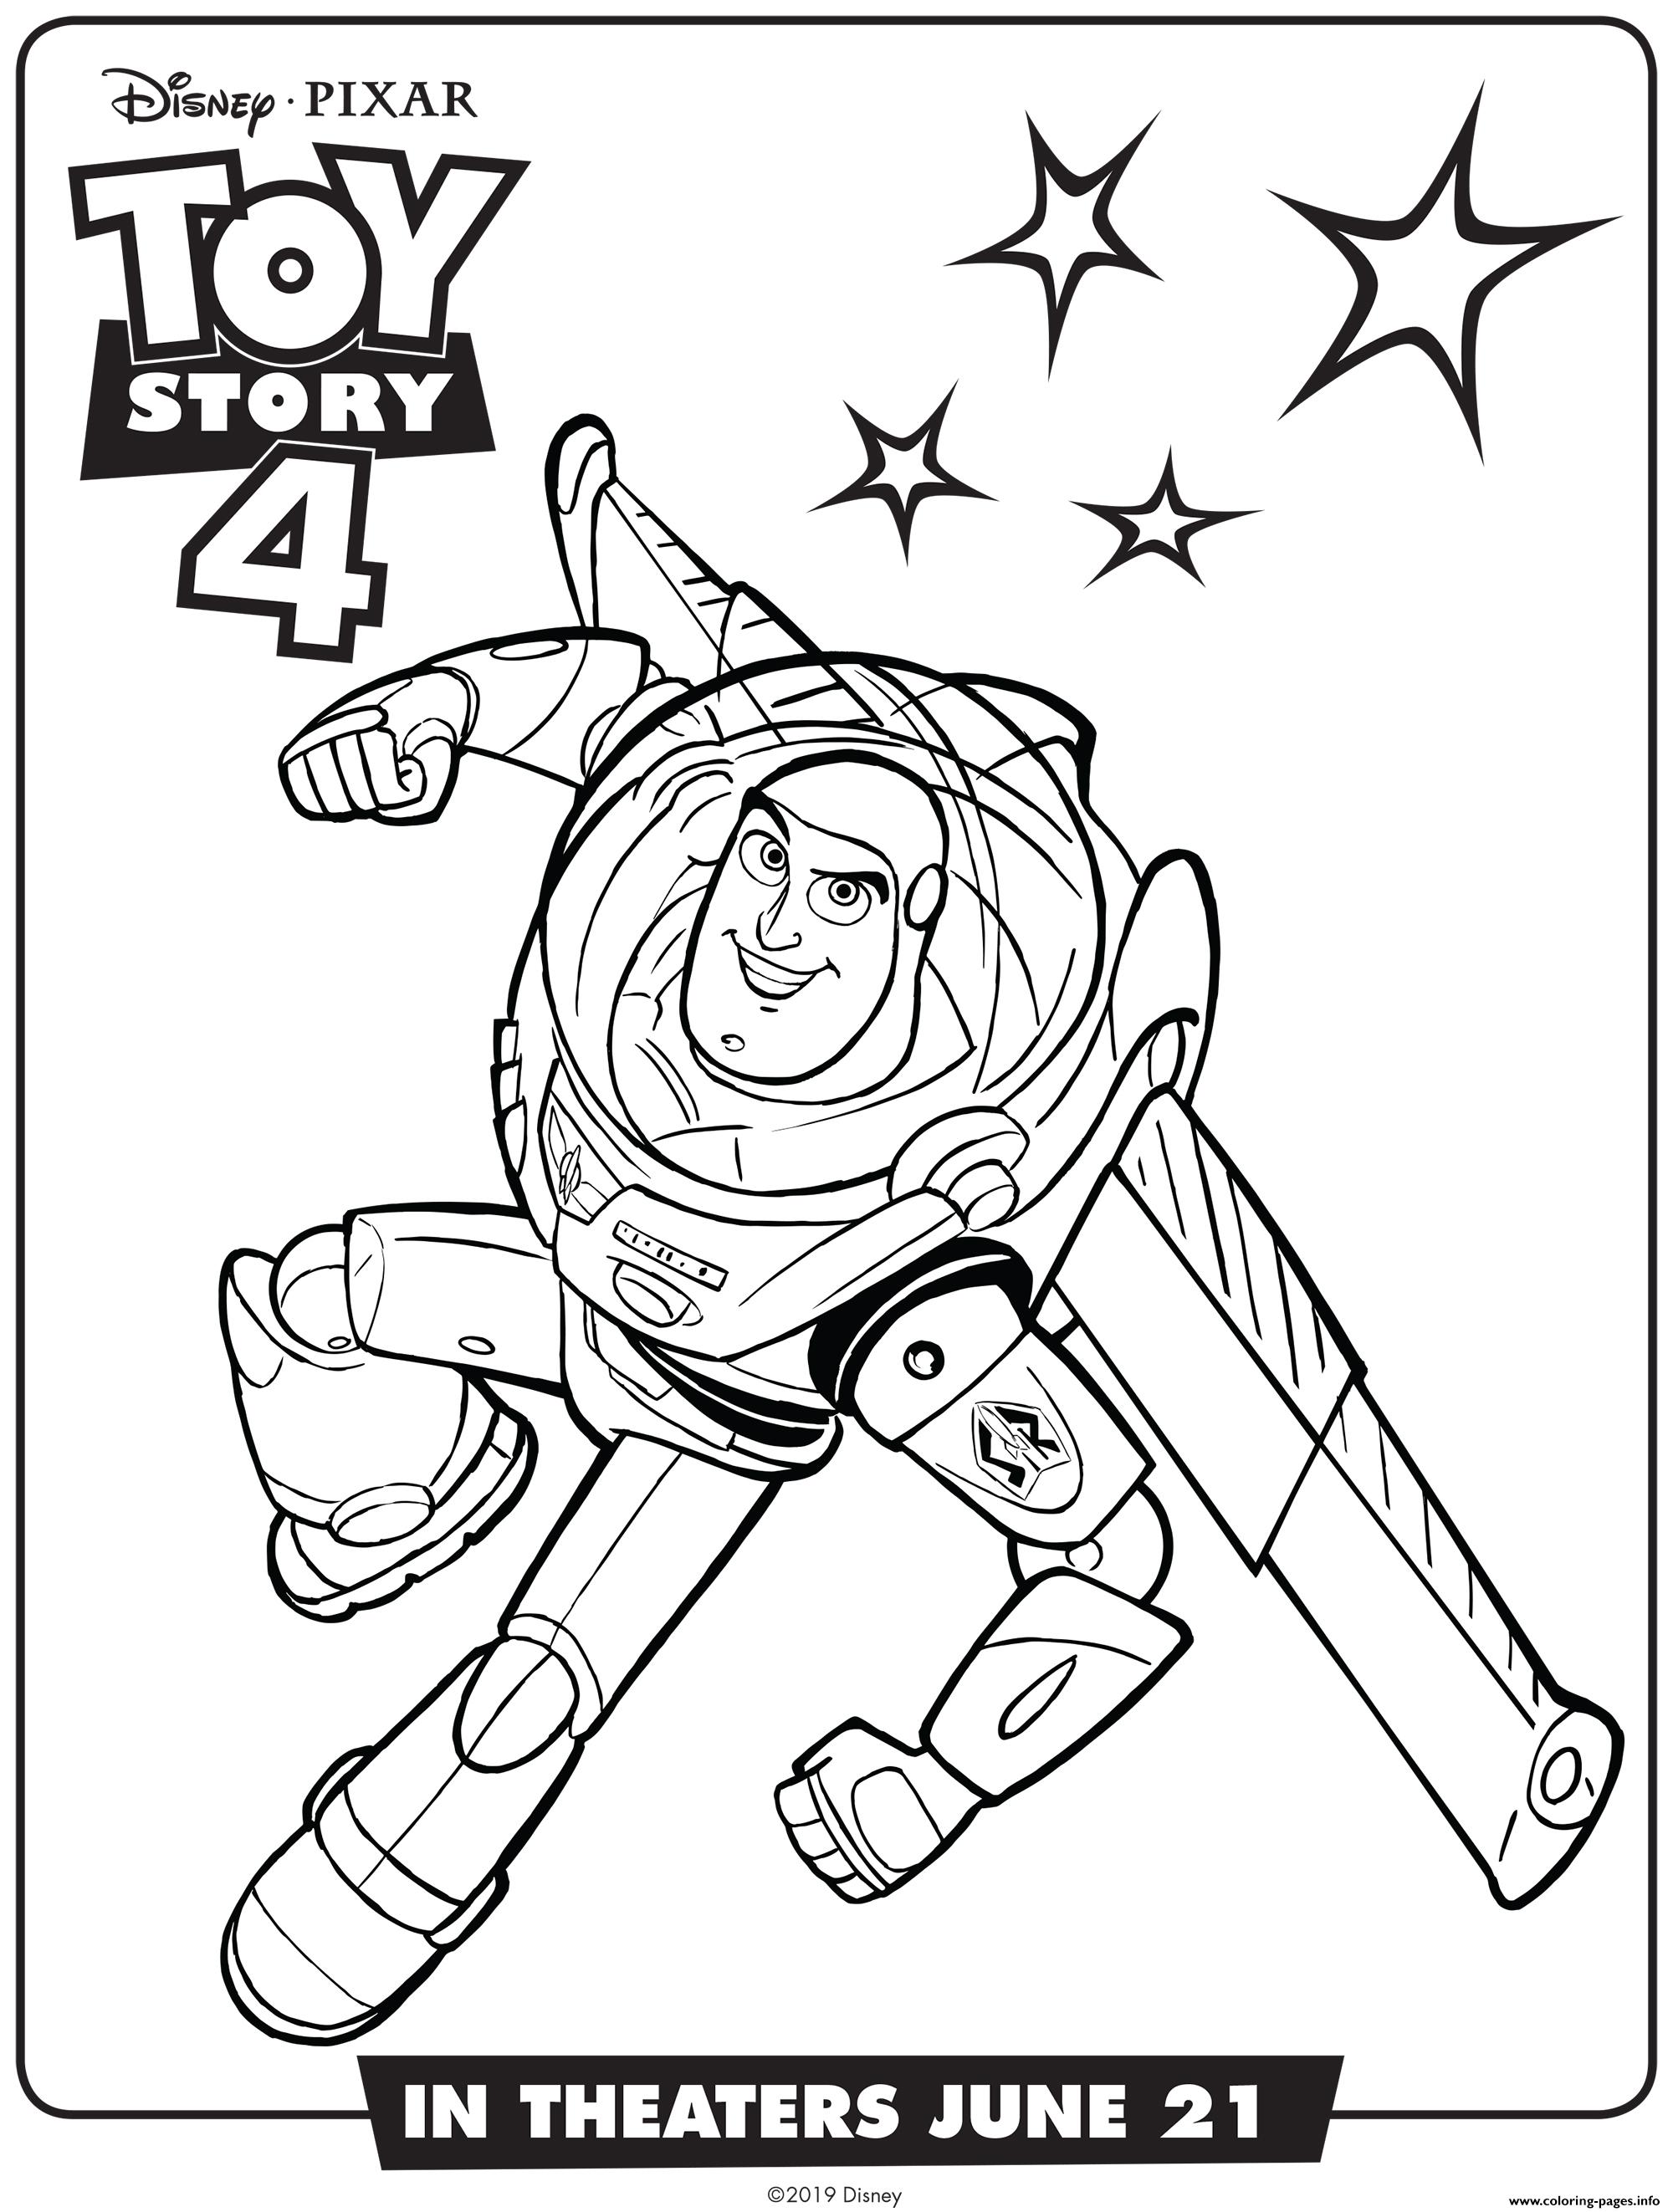 Toy Story 4 Buzz Lightyear coloring